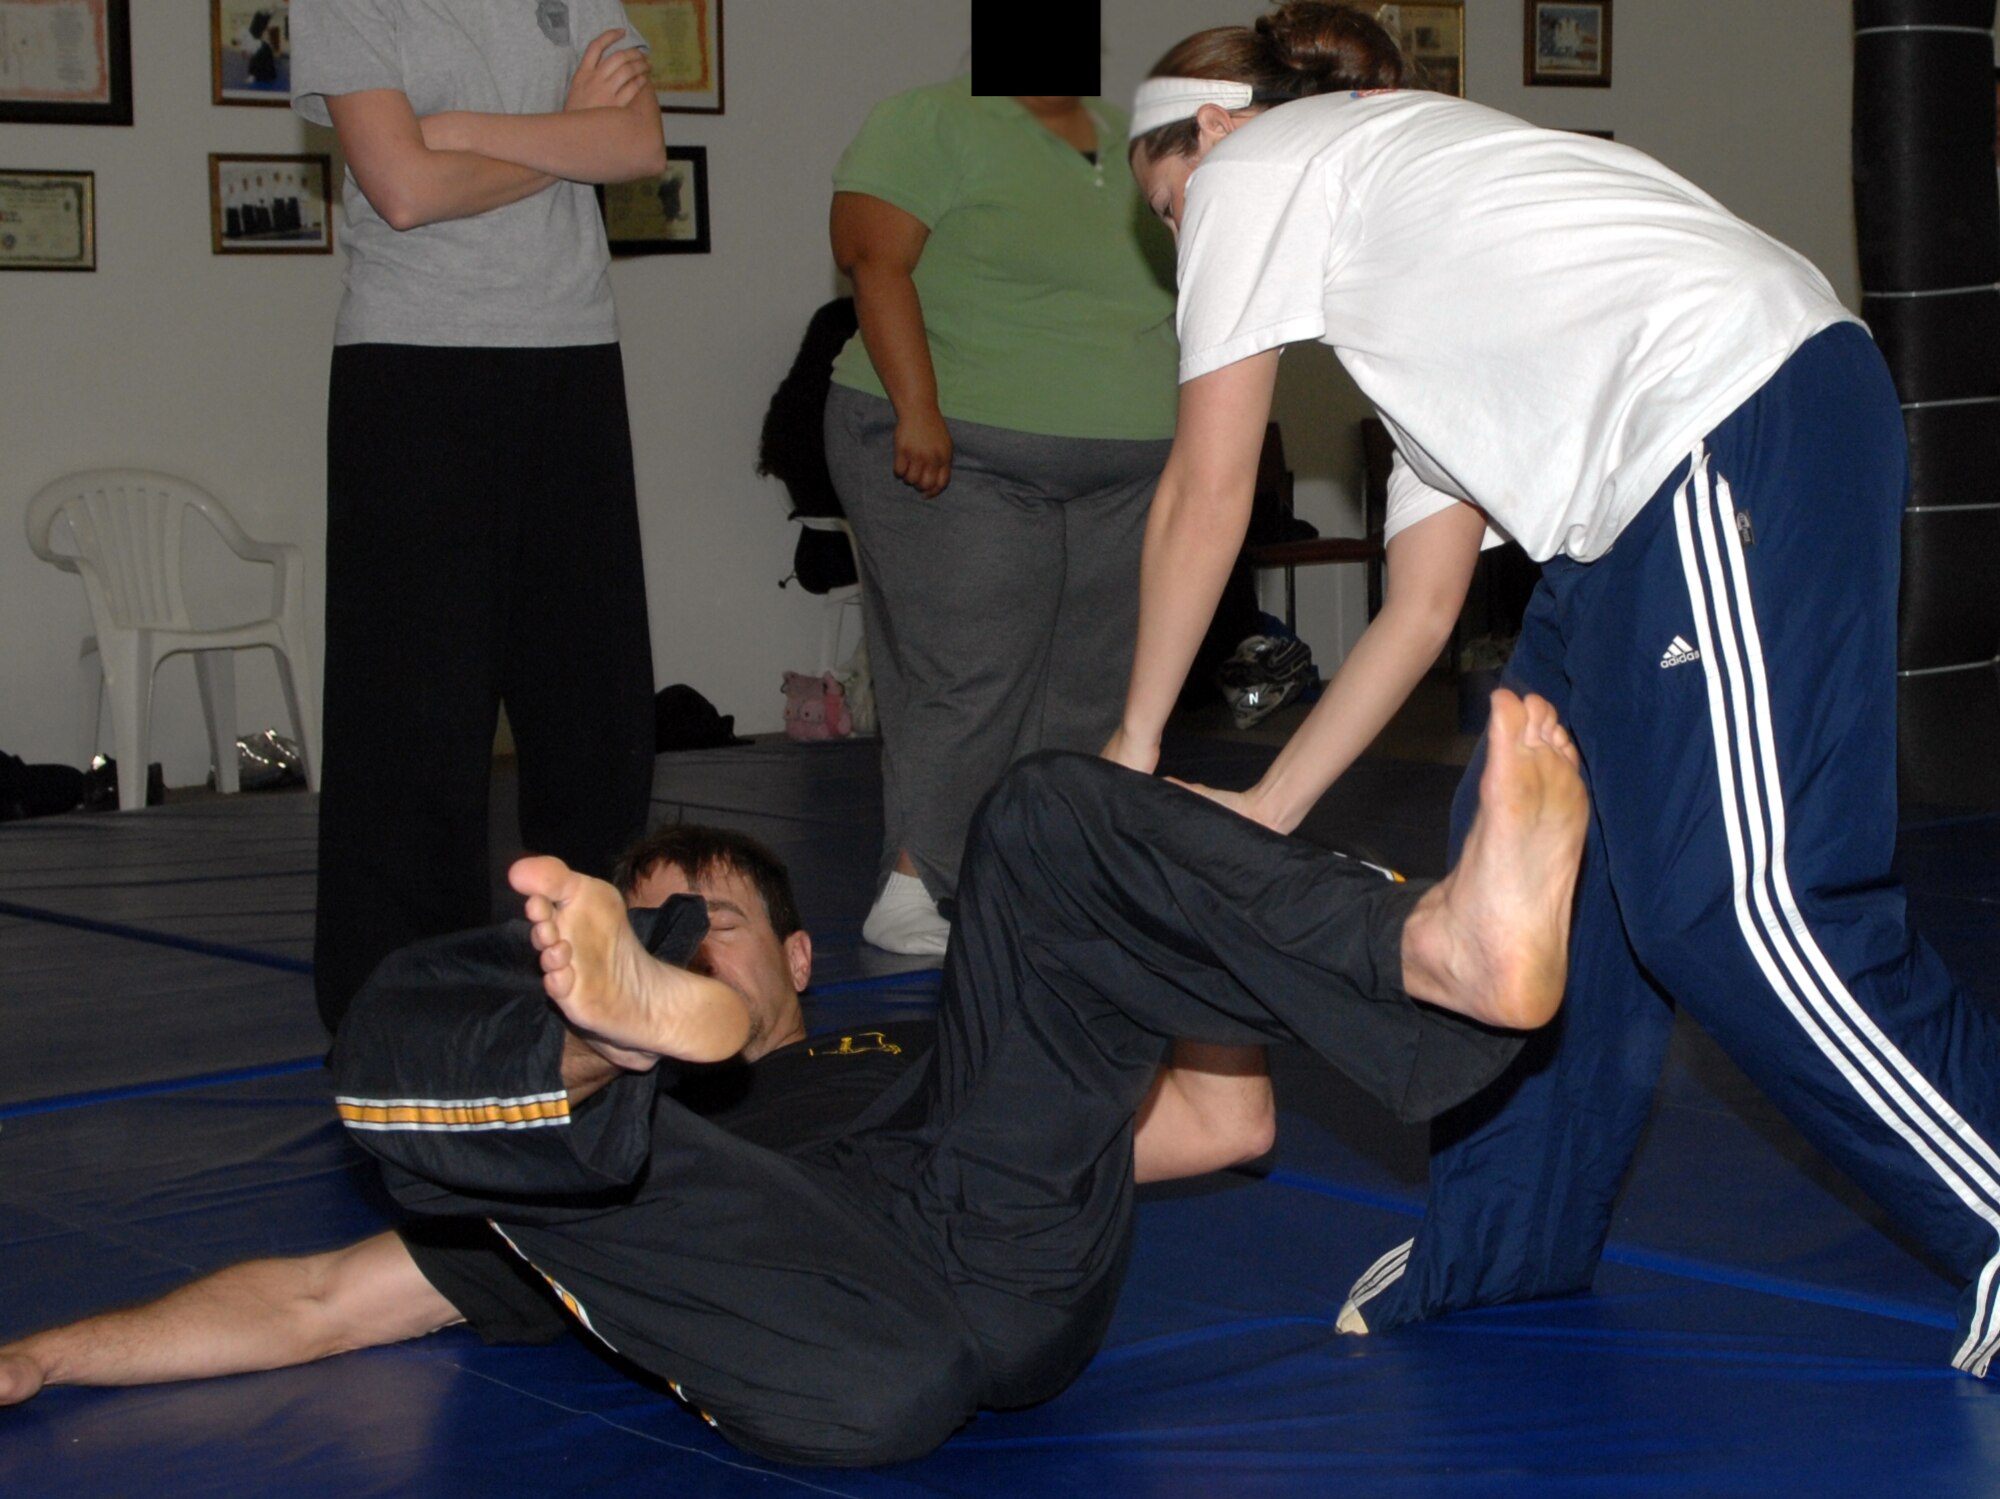 A participant in the “target hardening” self-defense course throws Paul Buckingham, Goodfellow’s Sexual Assault Response Coordinator, to the mat as she practices a self-defense technique. (U.S. Air Force photo by Staff Sgt. John Barton)